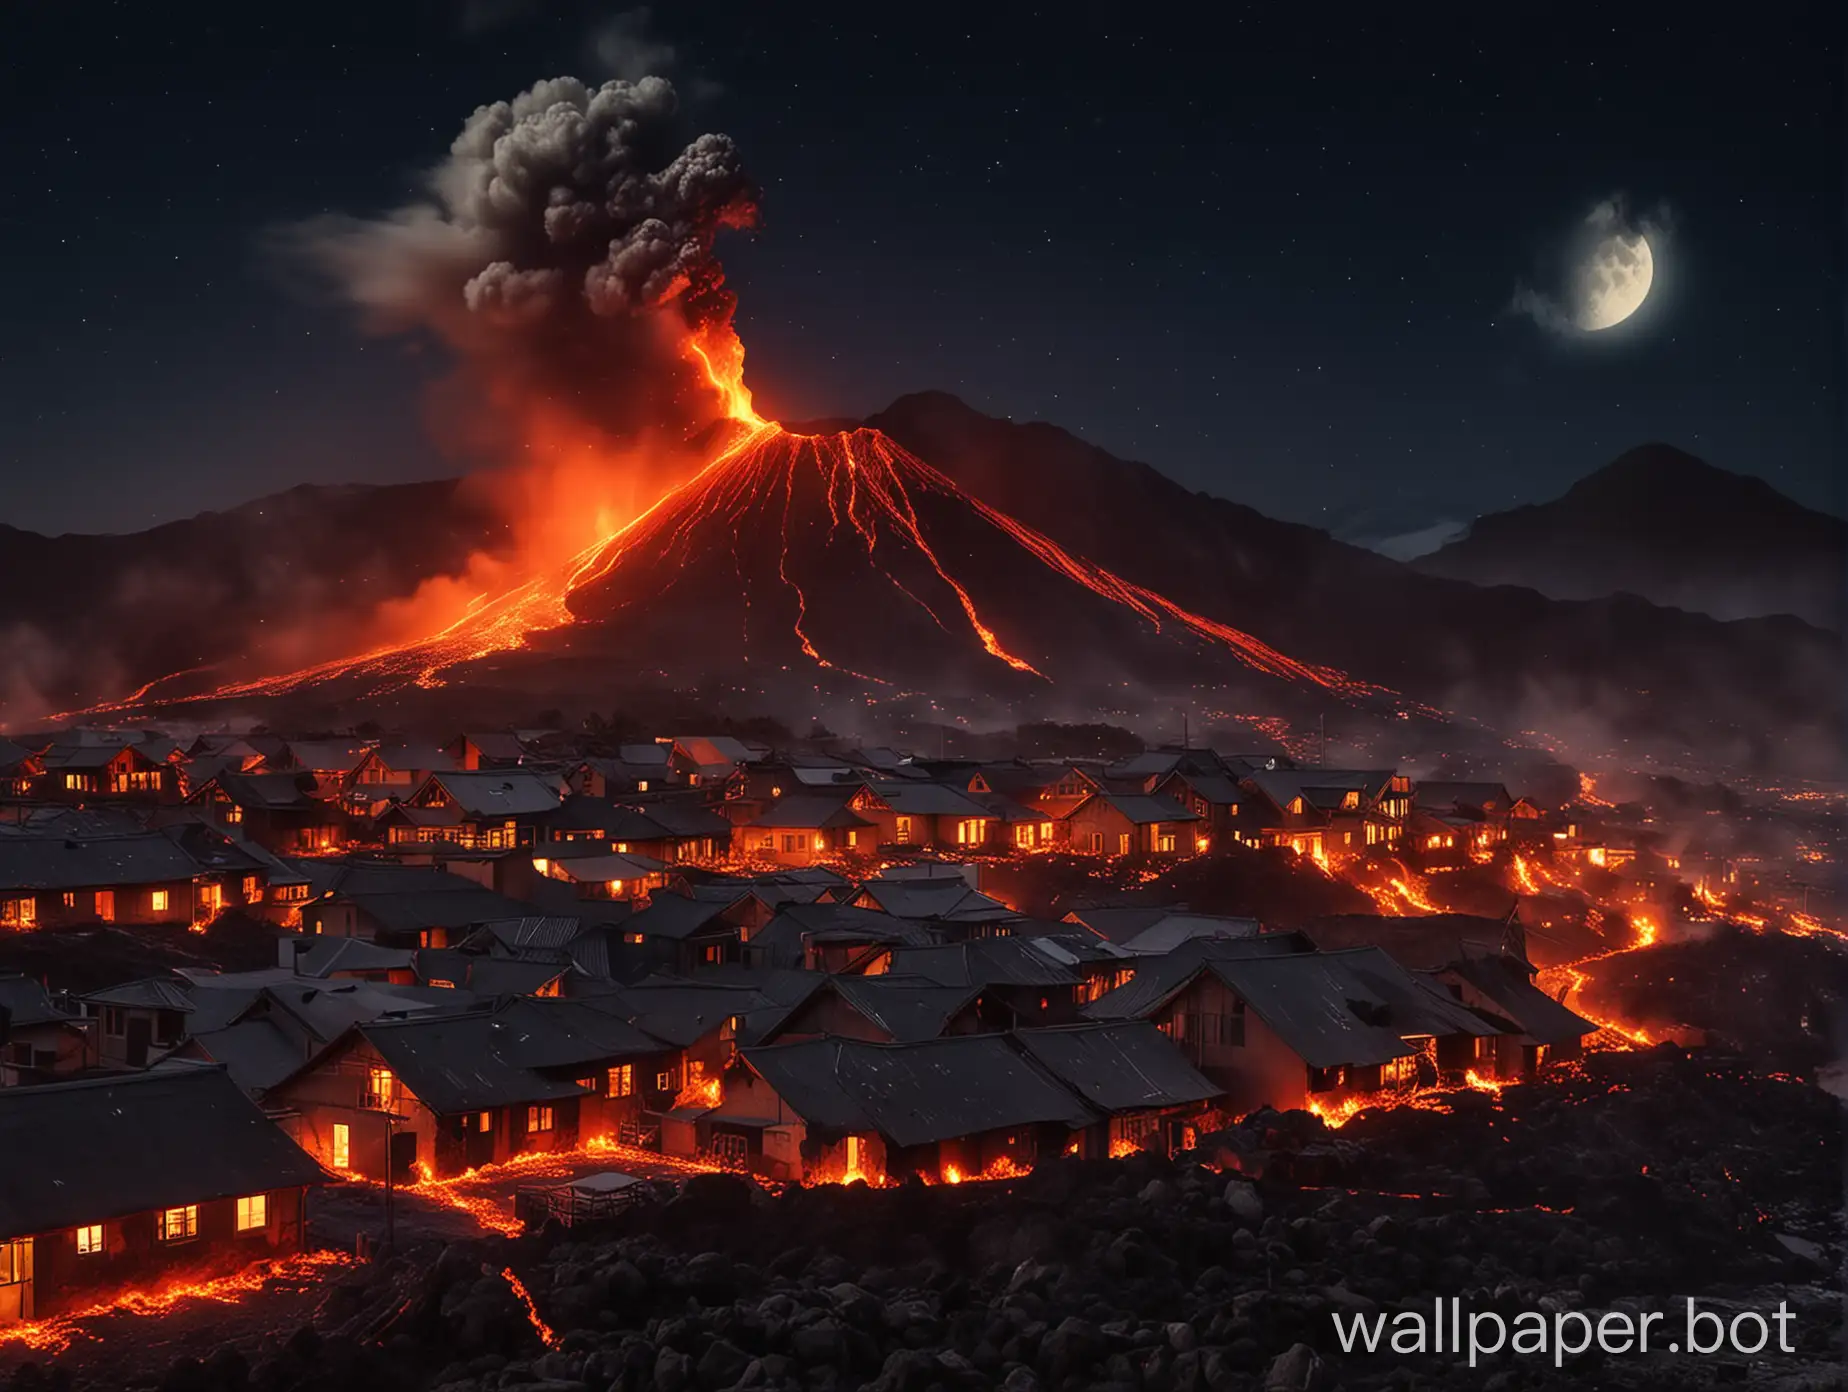 hot lava flows down the slope of an erupting volcano onto village houses. night. brightly shines moon.